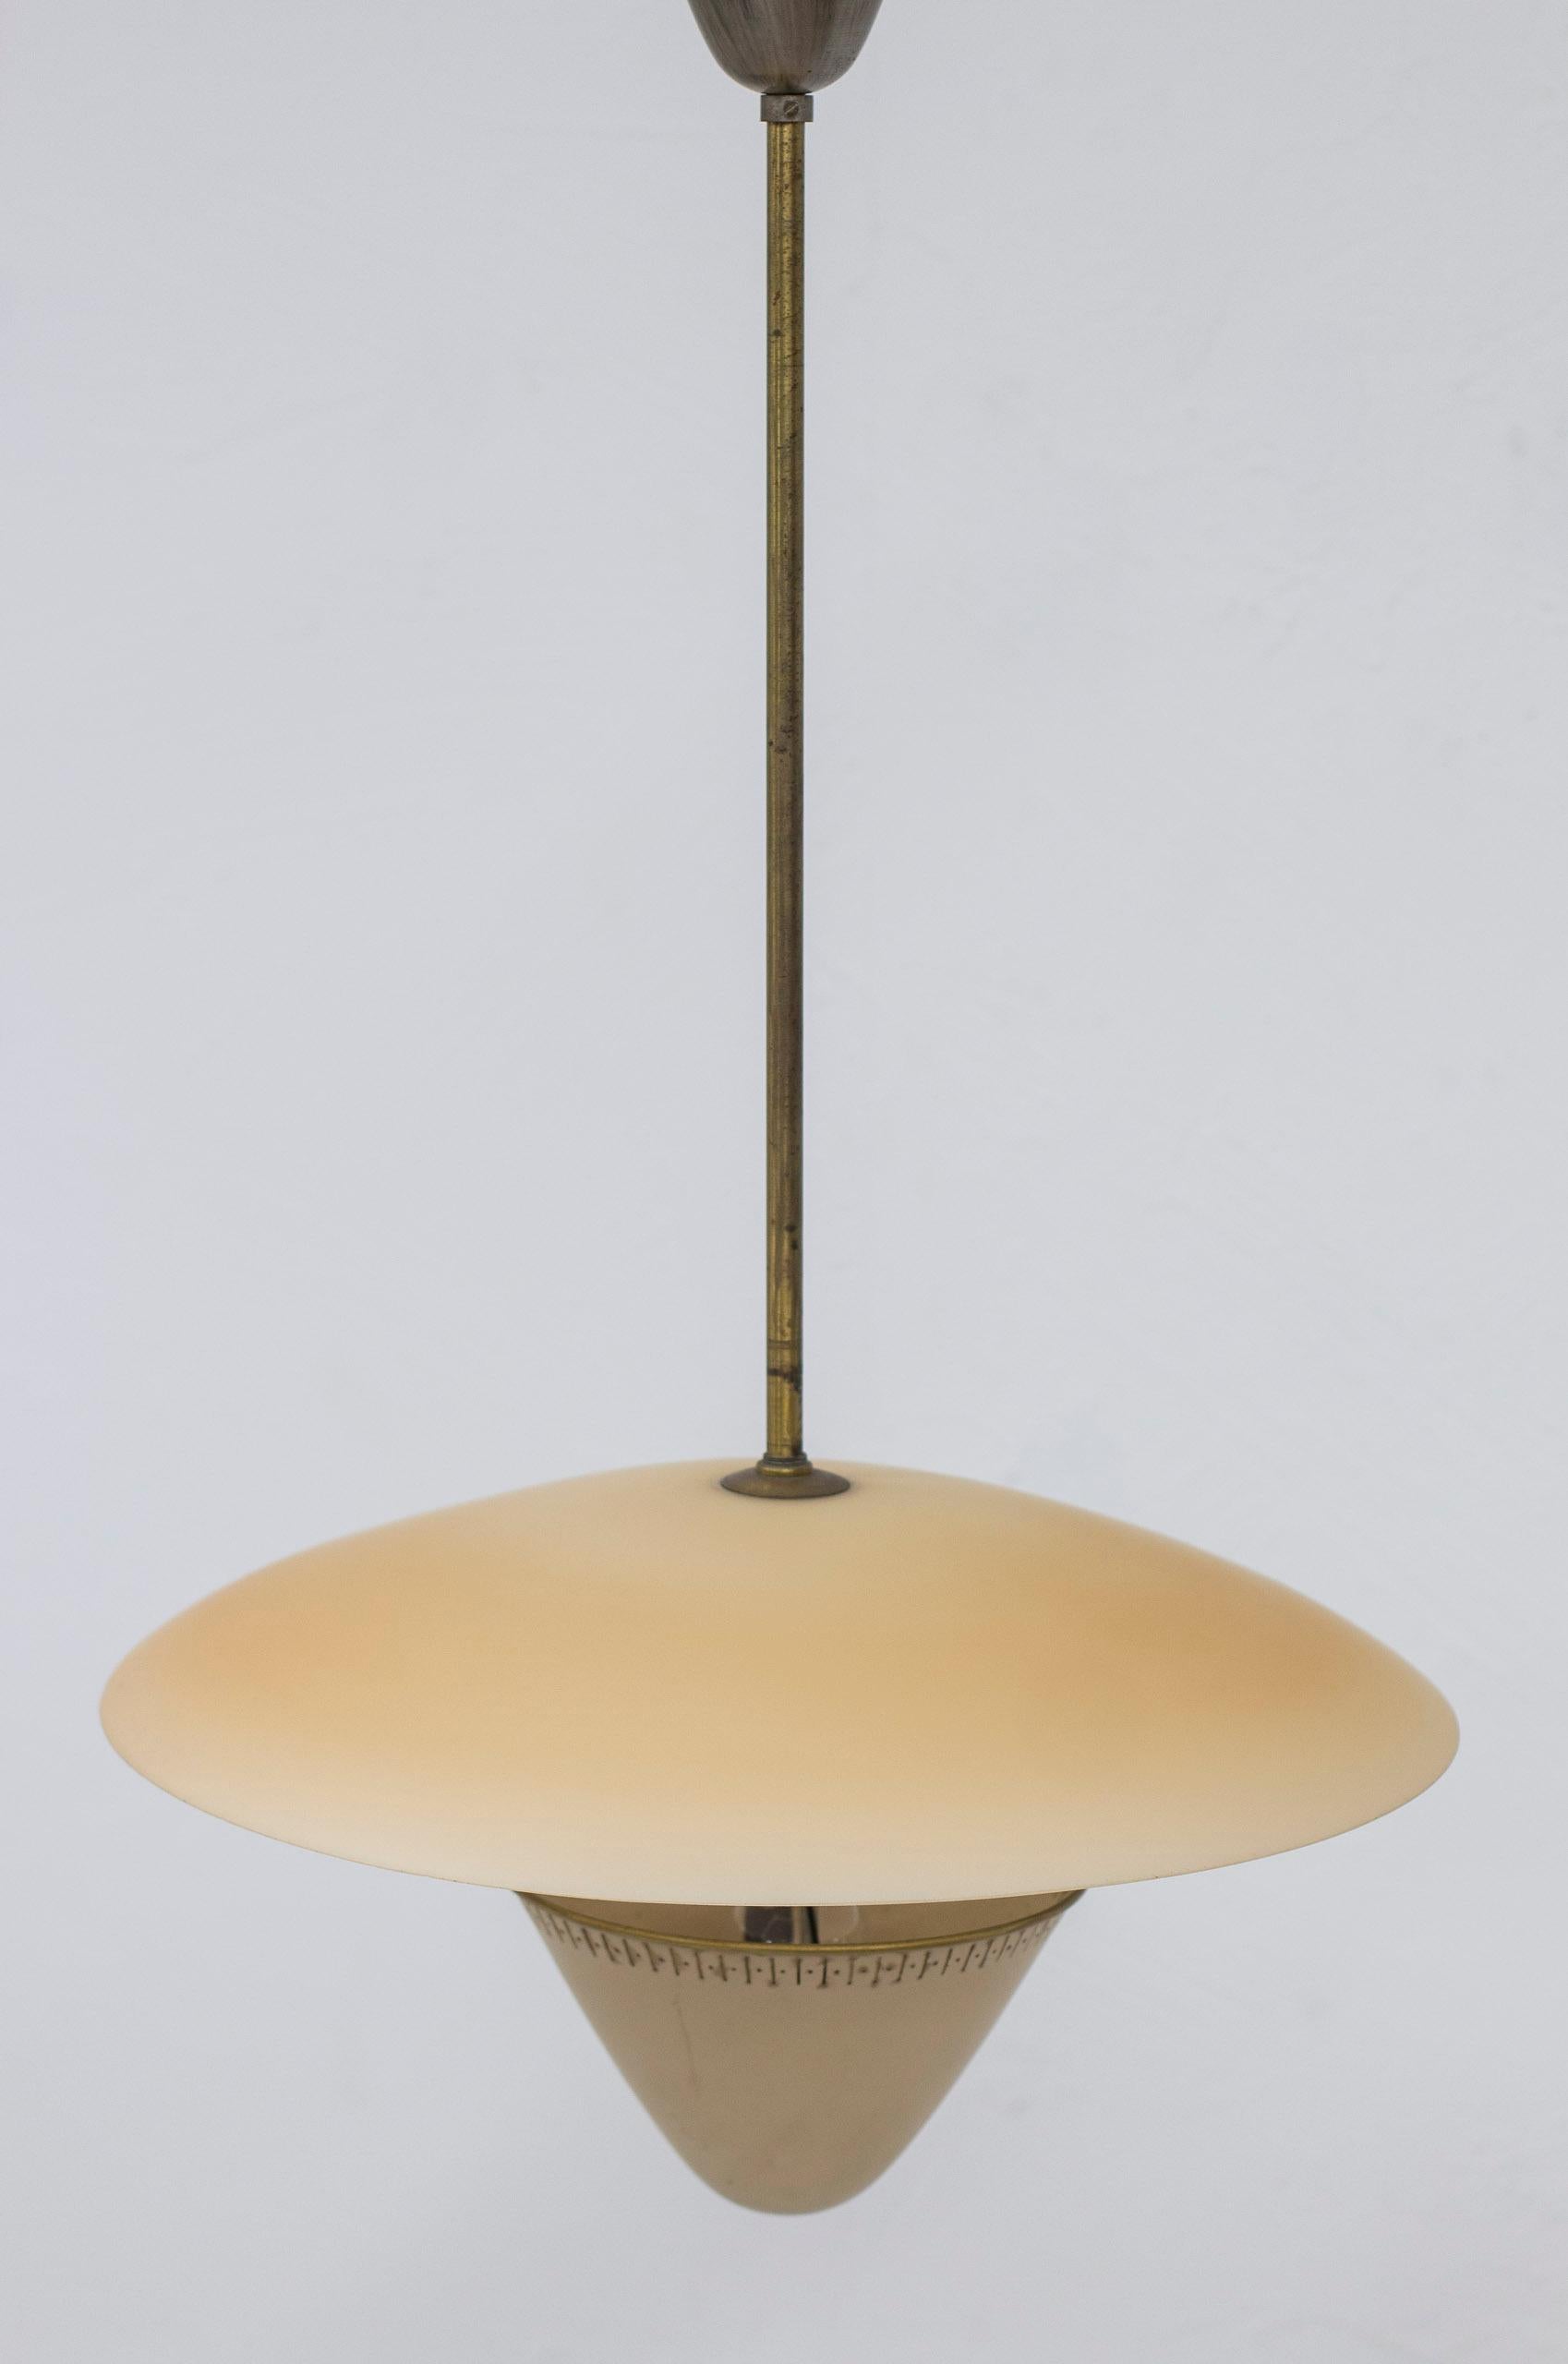 Swedish Modernist ceiling lamp in brass and opal glass by ASEA belysning, Sweden, 1930s